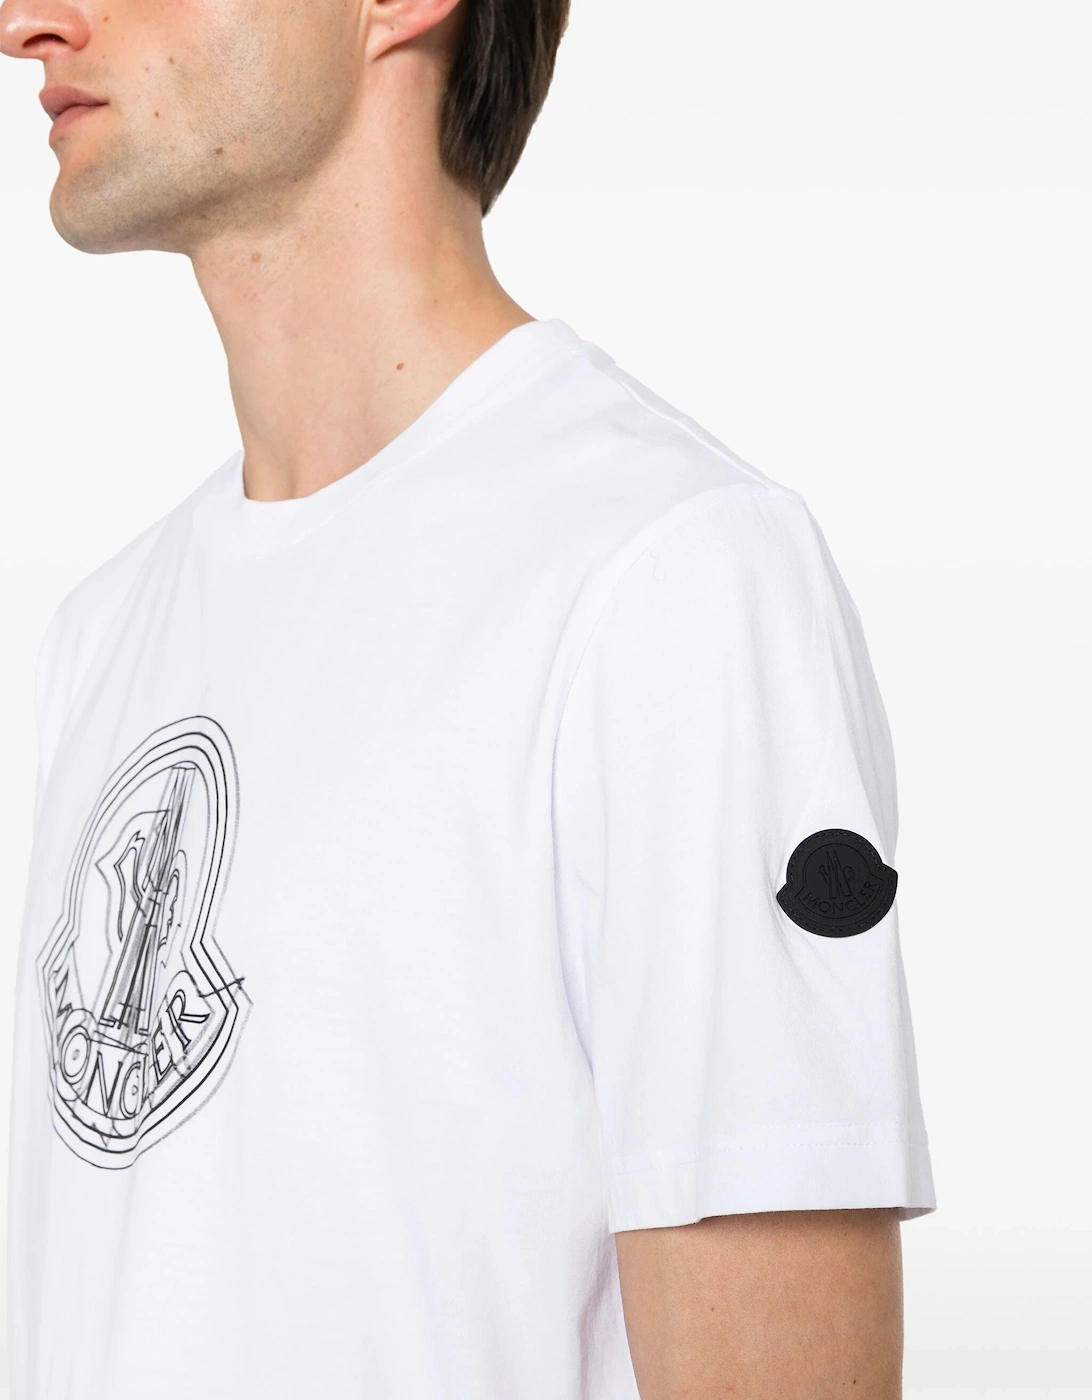 Appliqué-logo Outline Printed T-Shirt in White